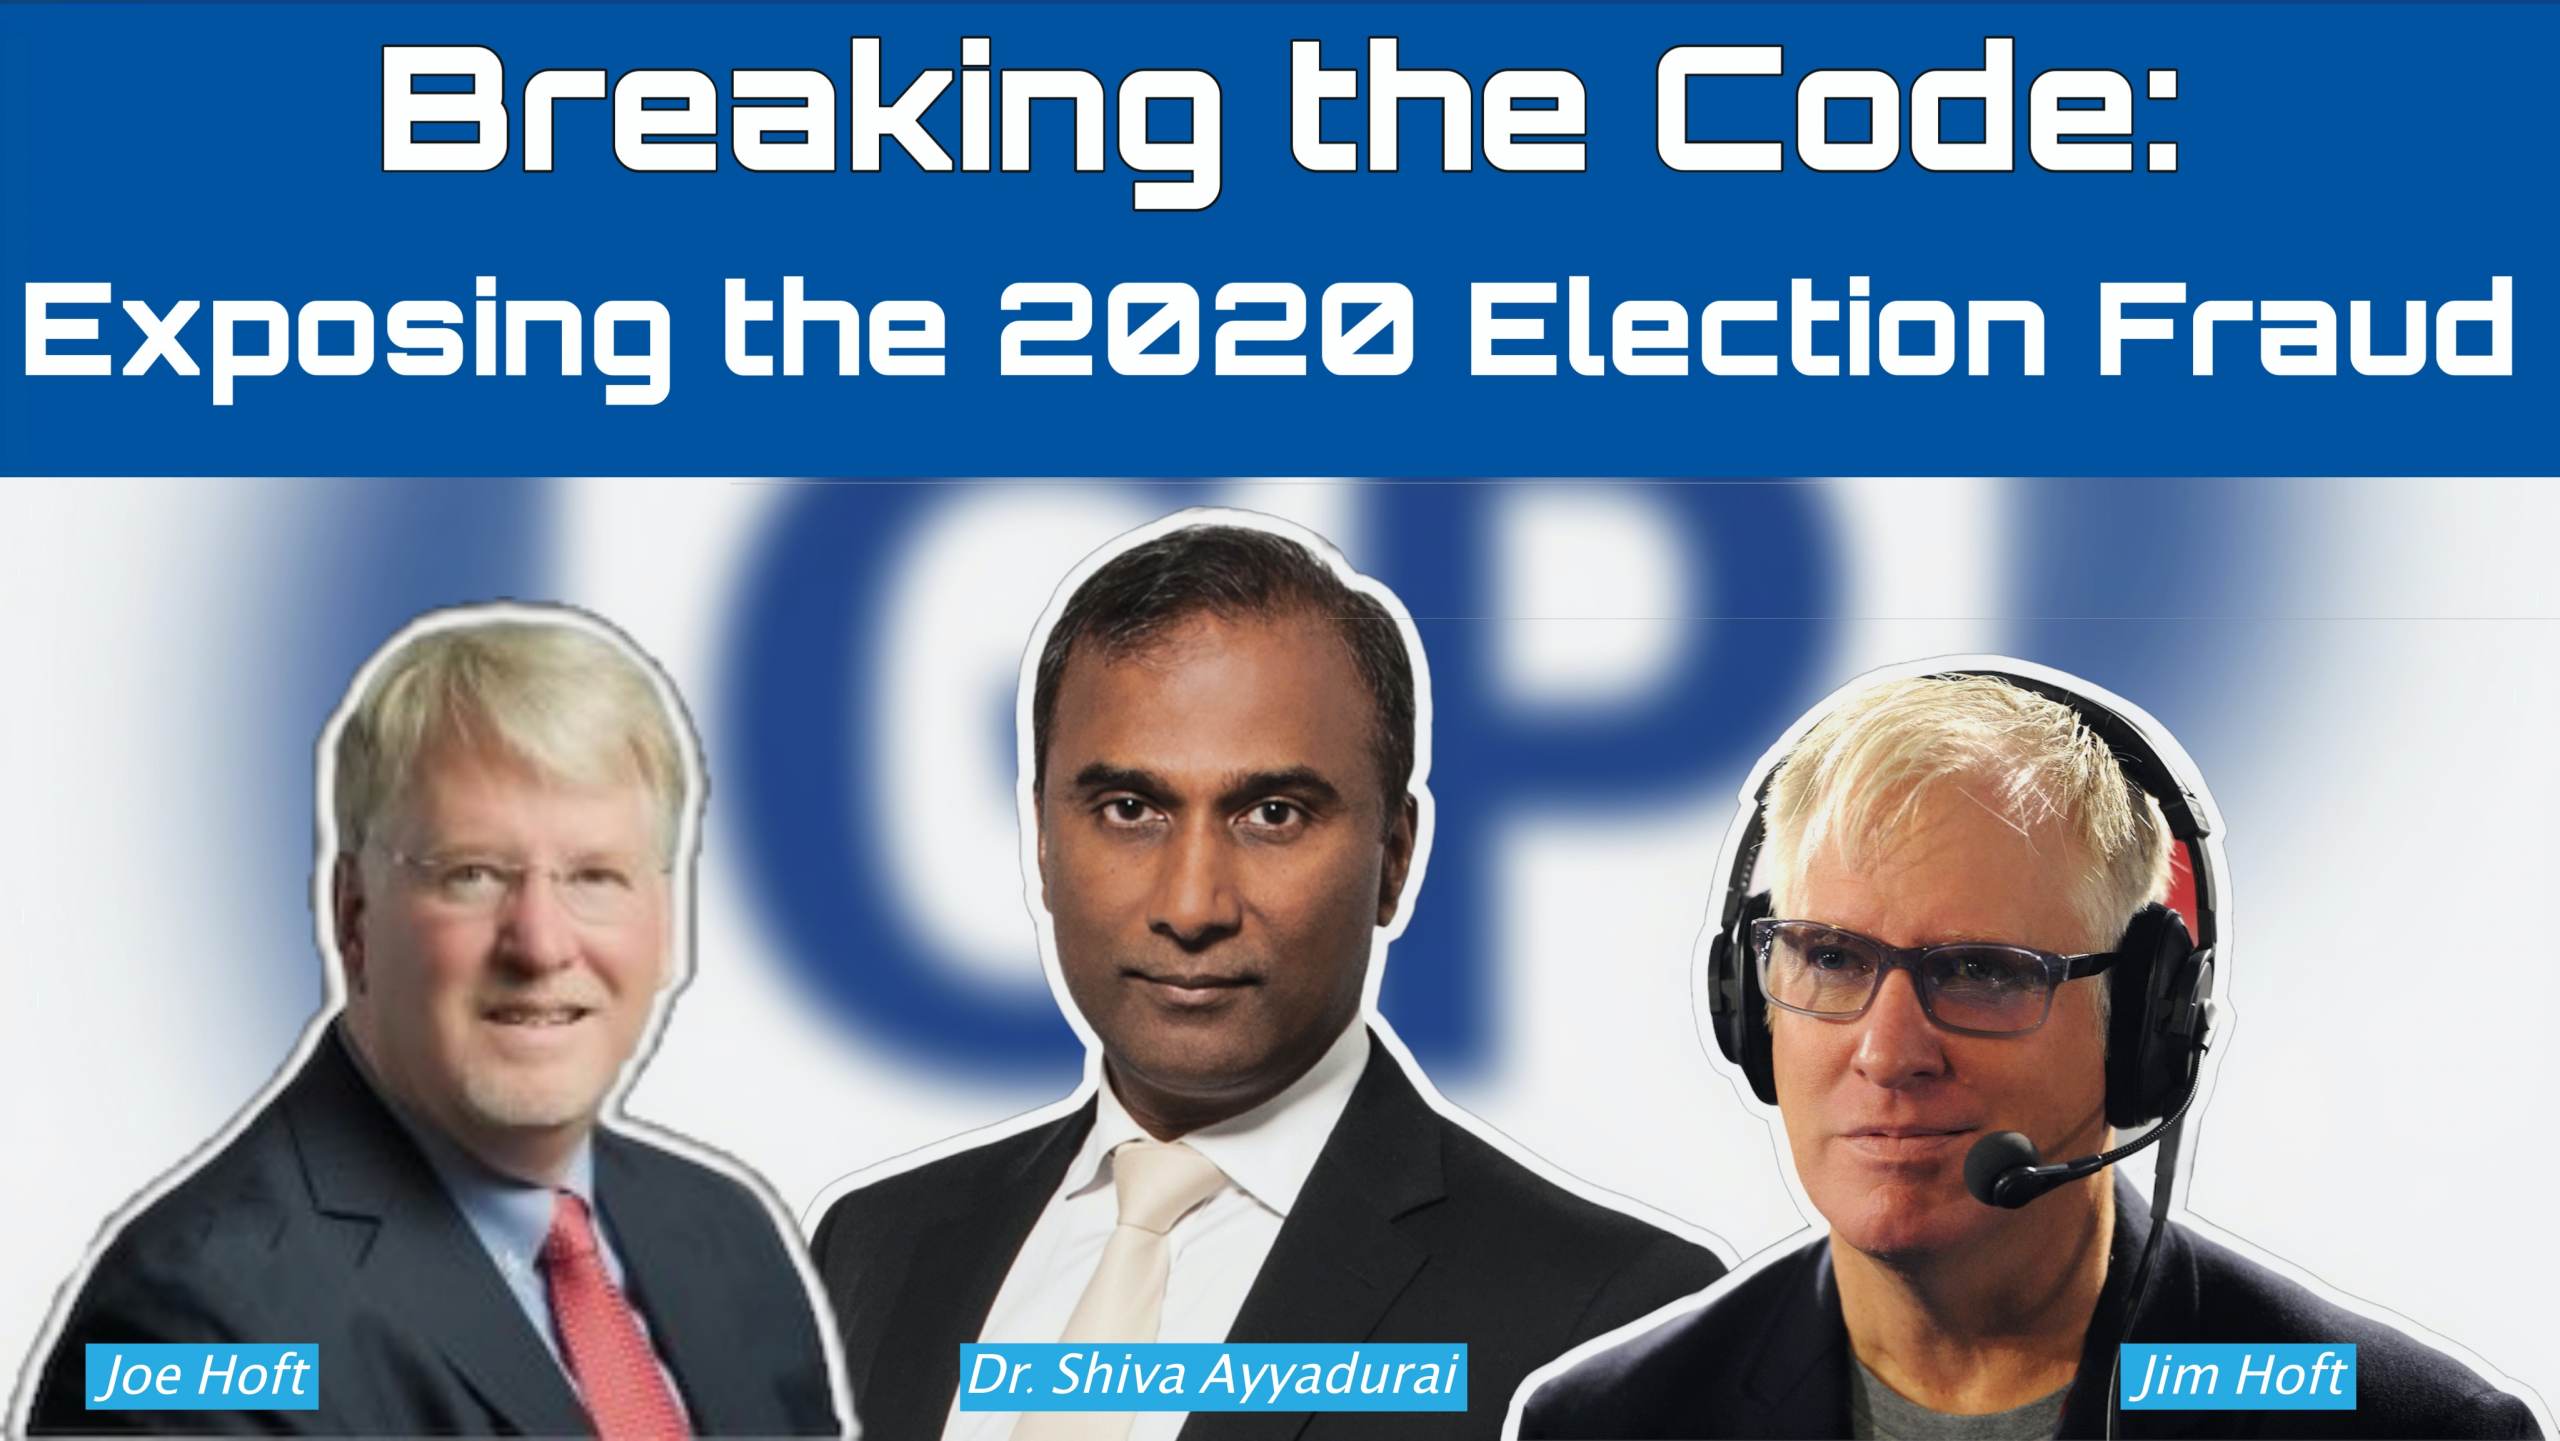 DON’T MISS THIS... Breaking the Code: Exposing the 2020 Election Fraud with Dr. Shiva Ayyadurai, Joe Hoft and Jim Hoft from Gateway Pundit